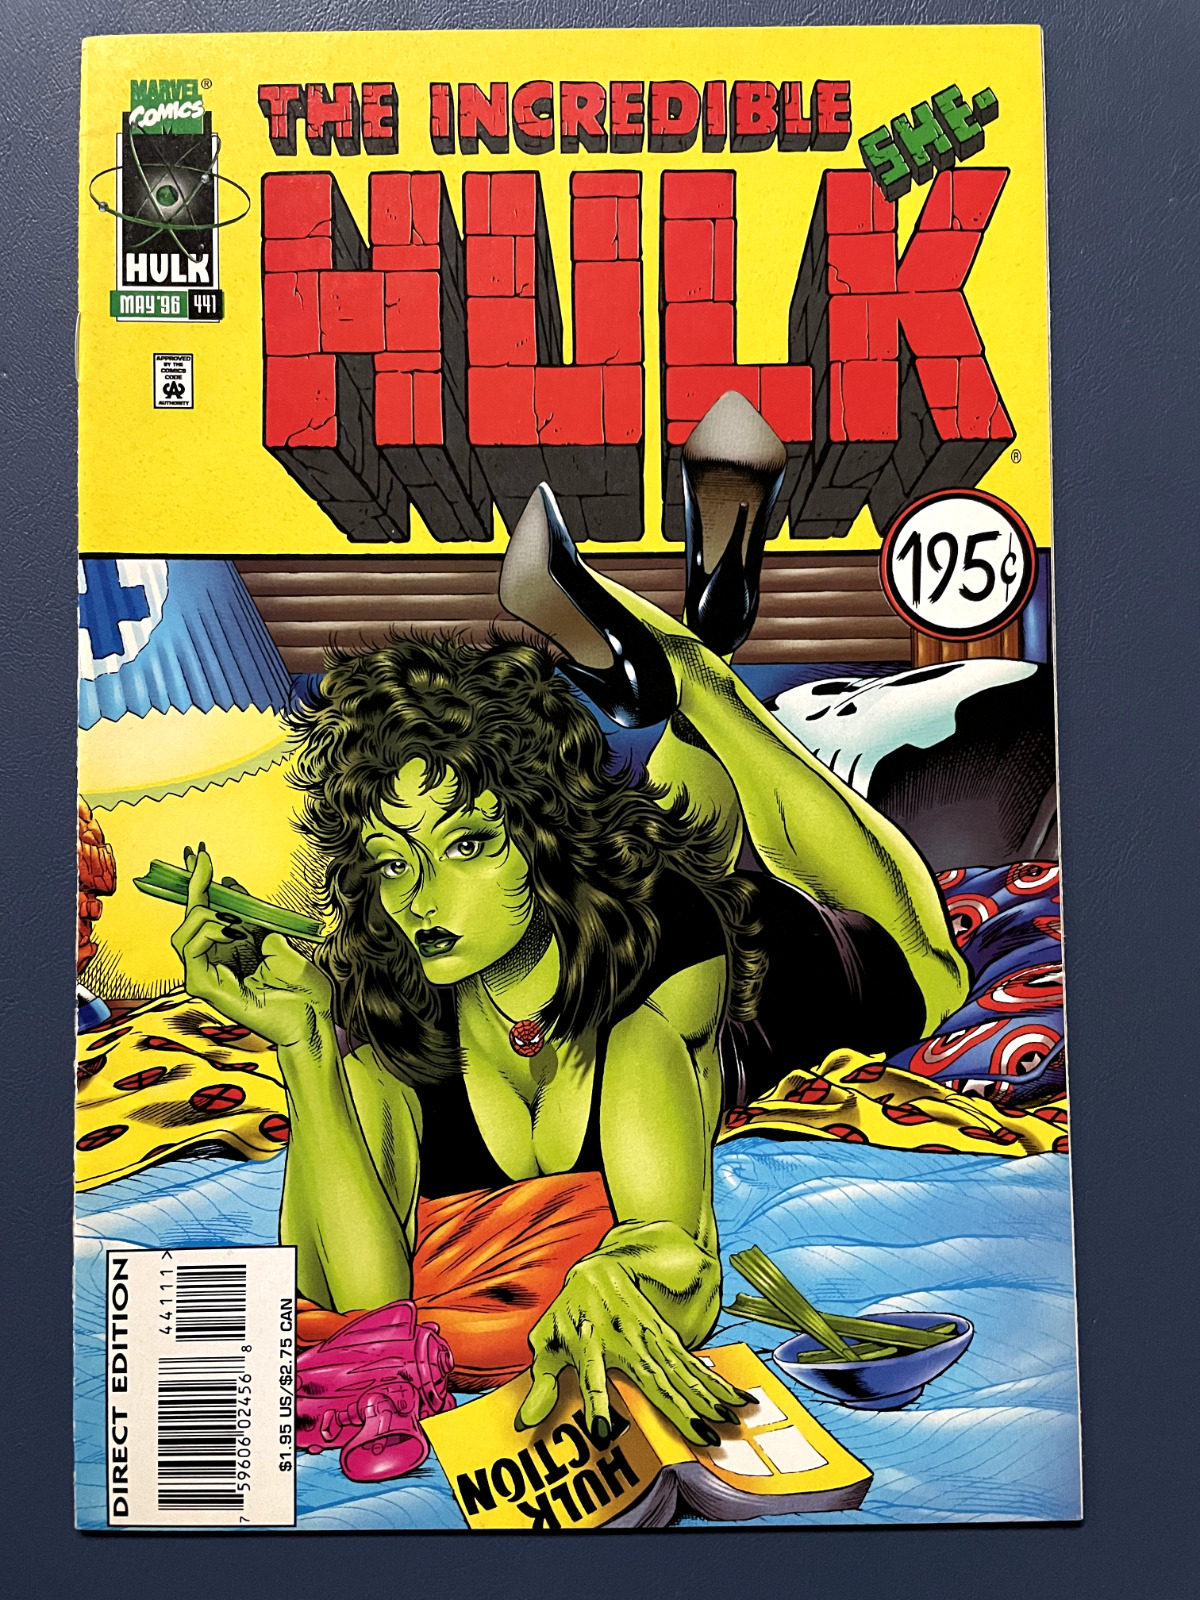 The Incredible Hulk #441 - Pulp Fiction Movie Homage